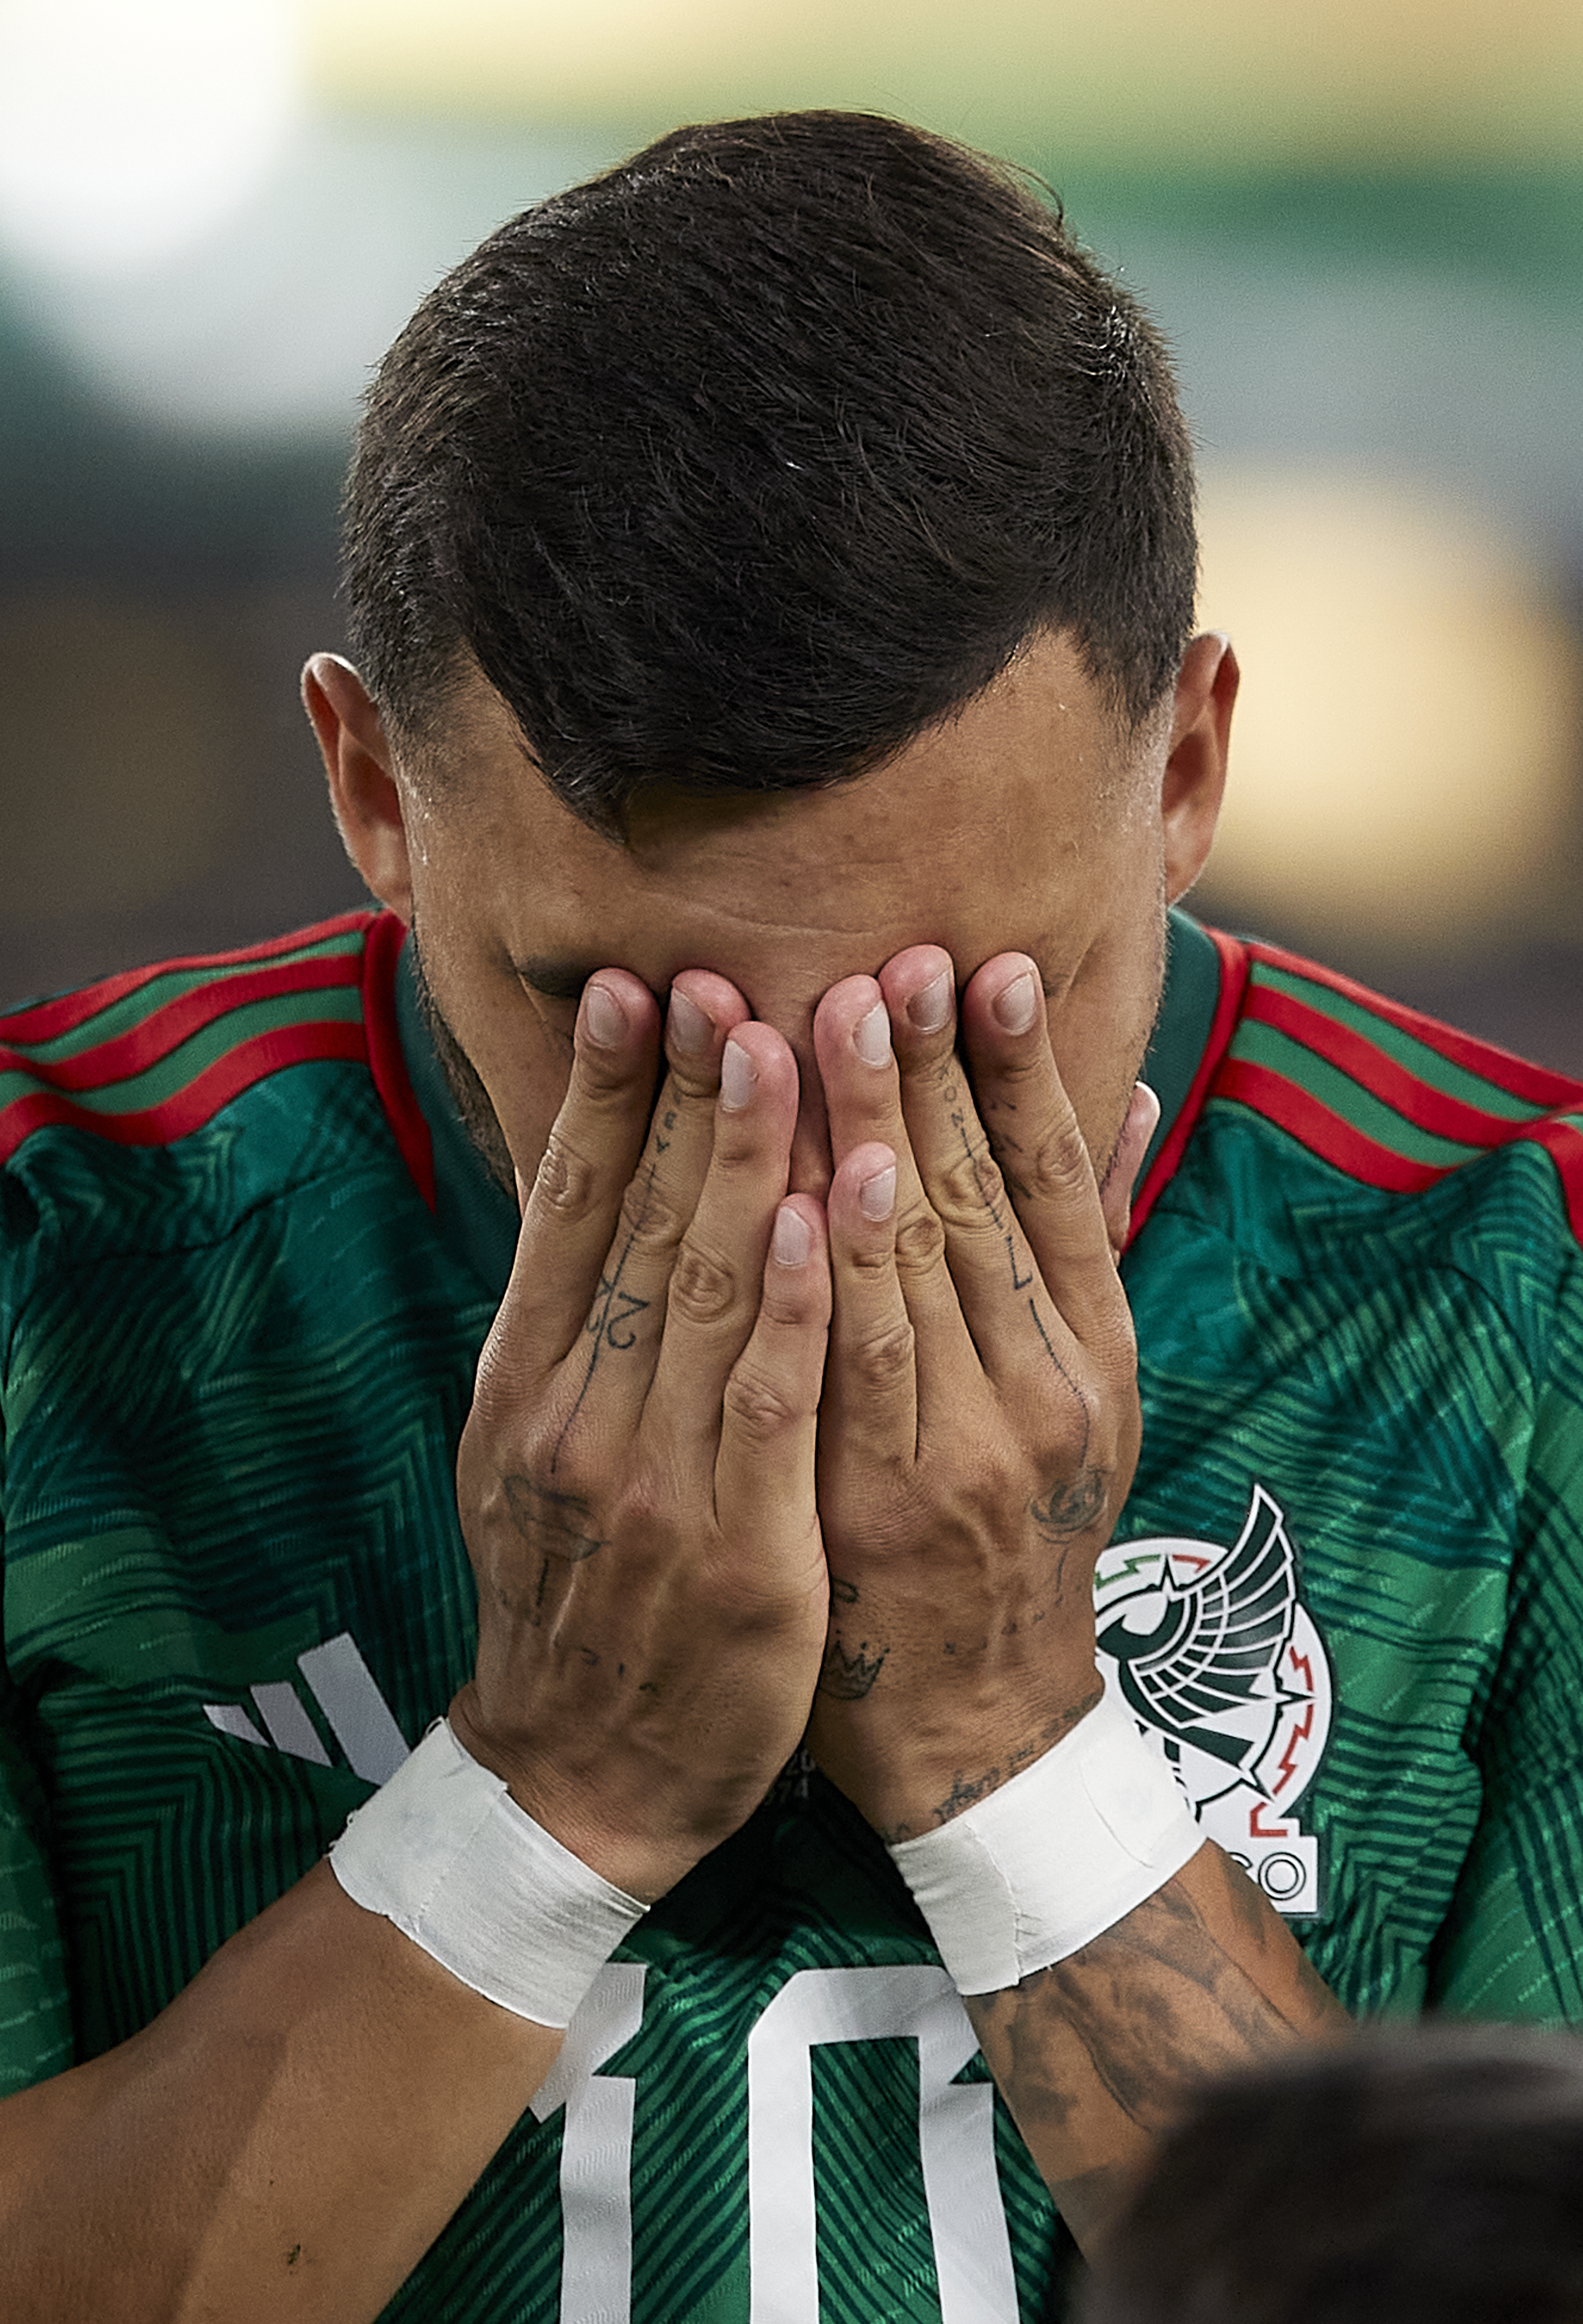 , Chelsea transfer target Alexis Vega breaks down in tears during Mexico national anthem ahead of Poland World Cup clash